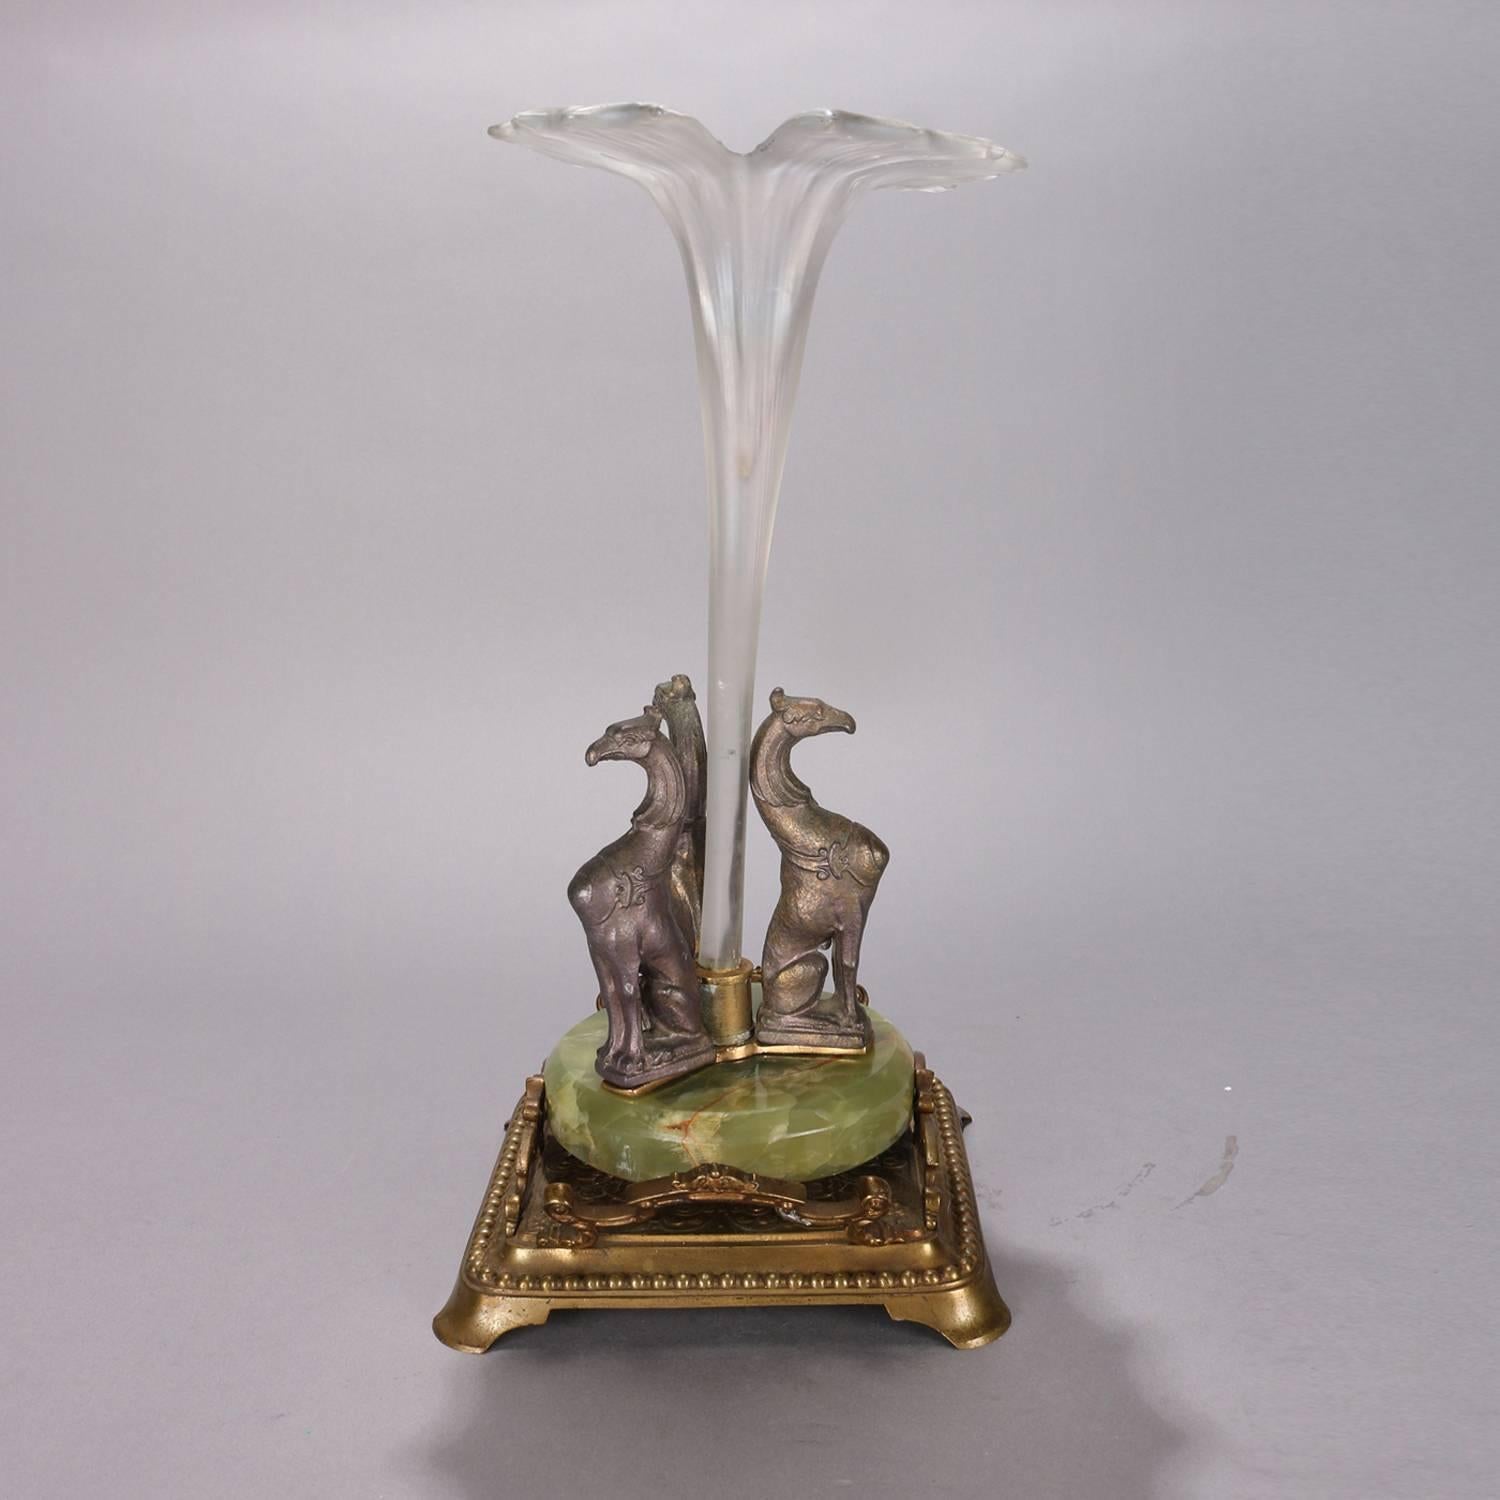 Victorian Figural French Gilt Metal Onyx and Art Glass Tulip Gryphon Orchid Epergne